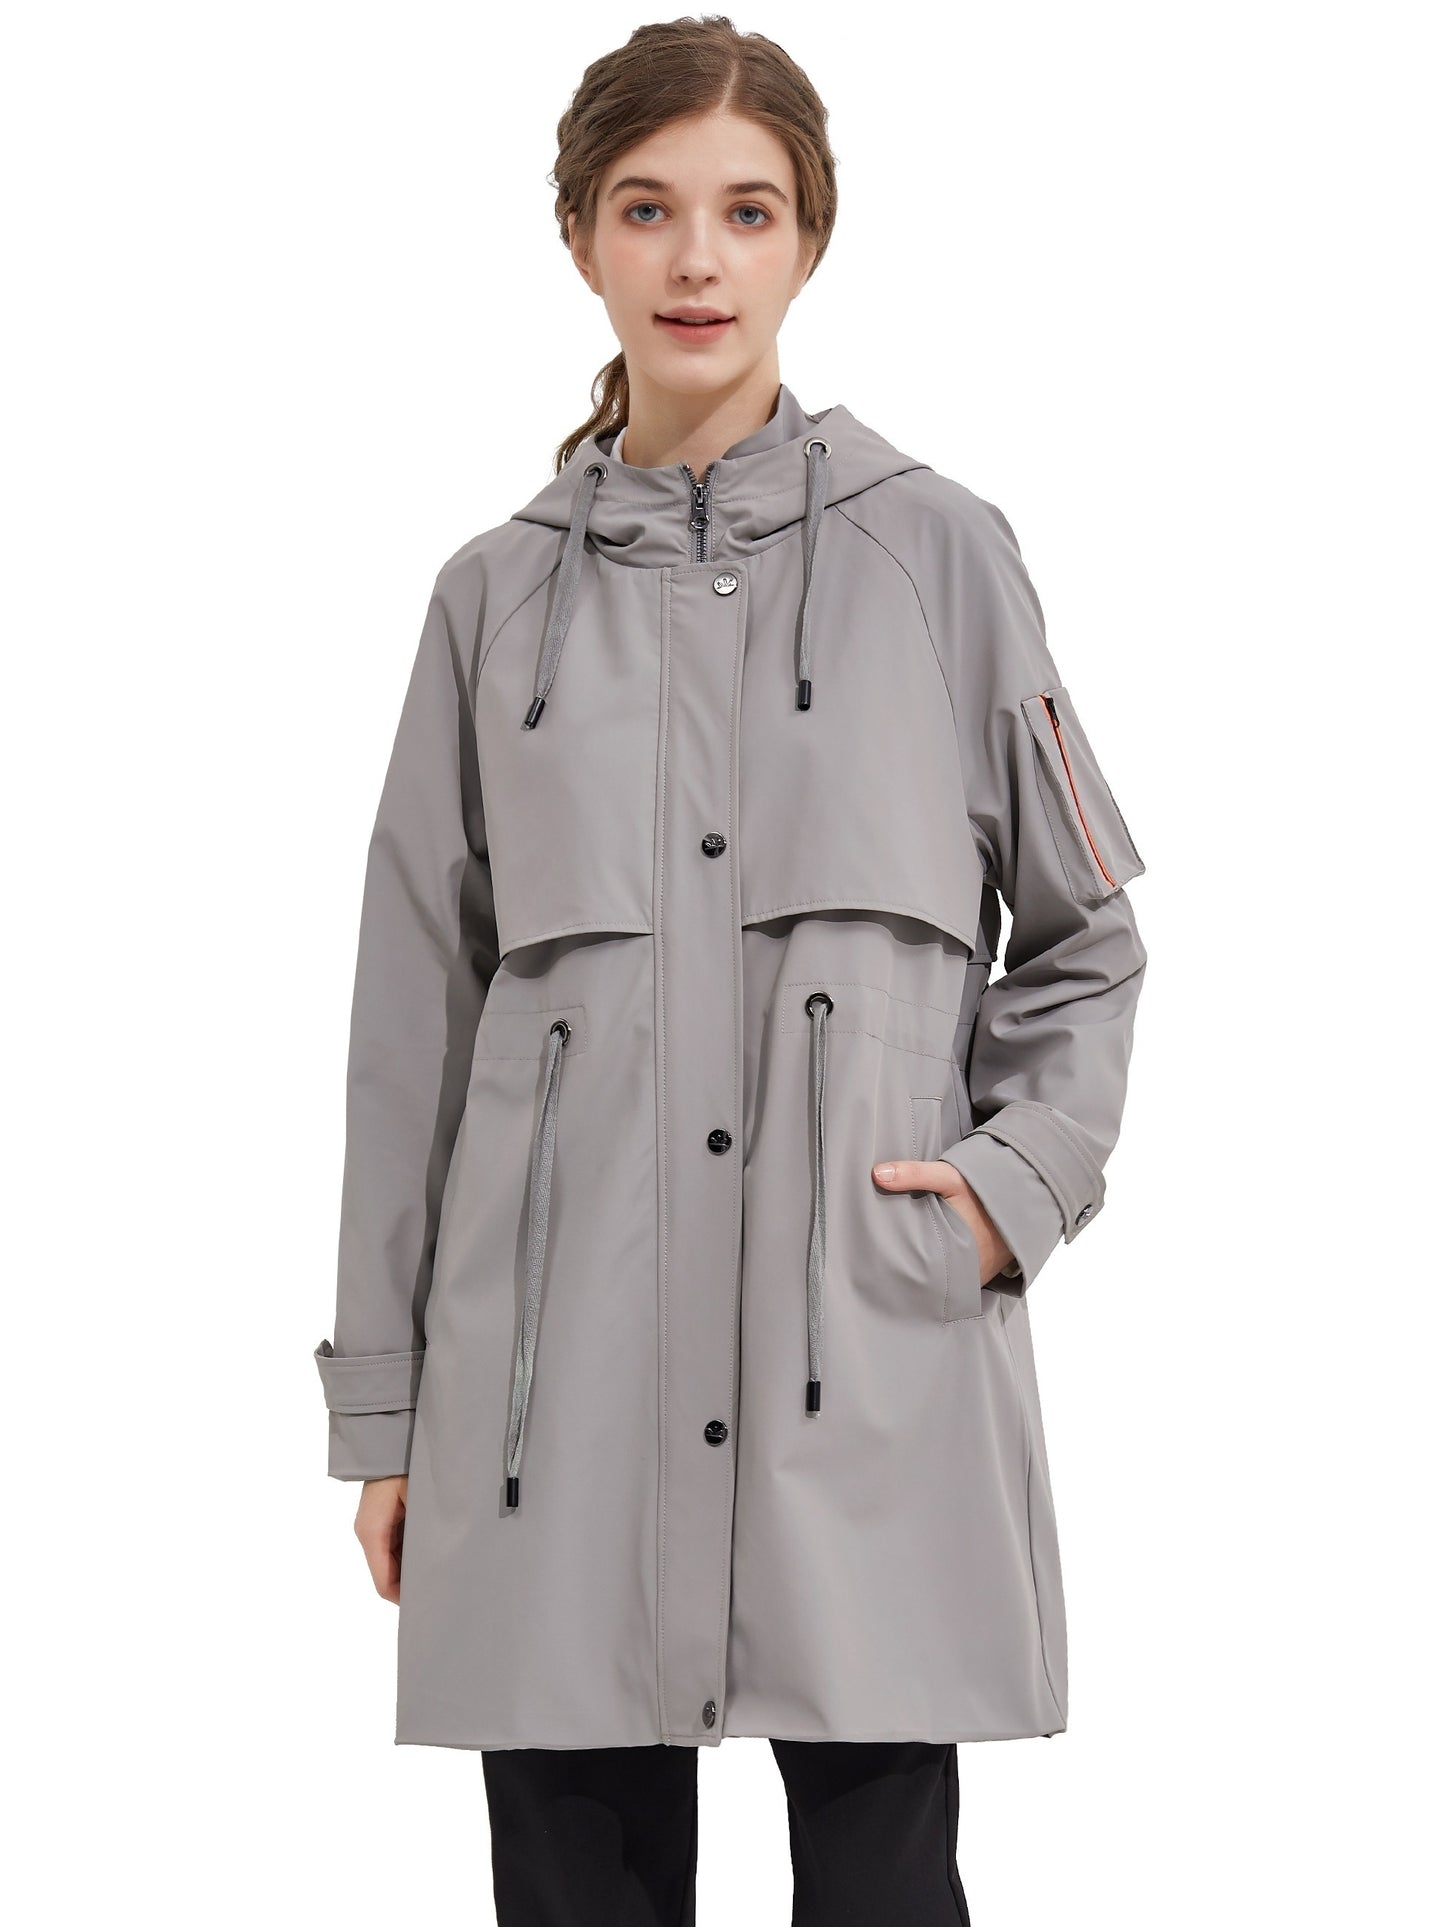 Antmvs Drawstring Hooded Coat, Casual Solid Button Front Long Sleeve Outerwear, Women's Clothing